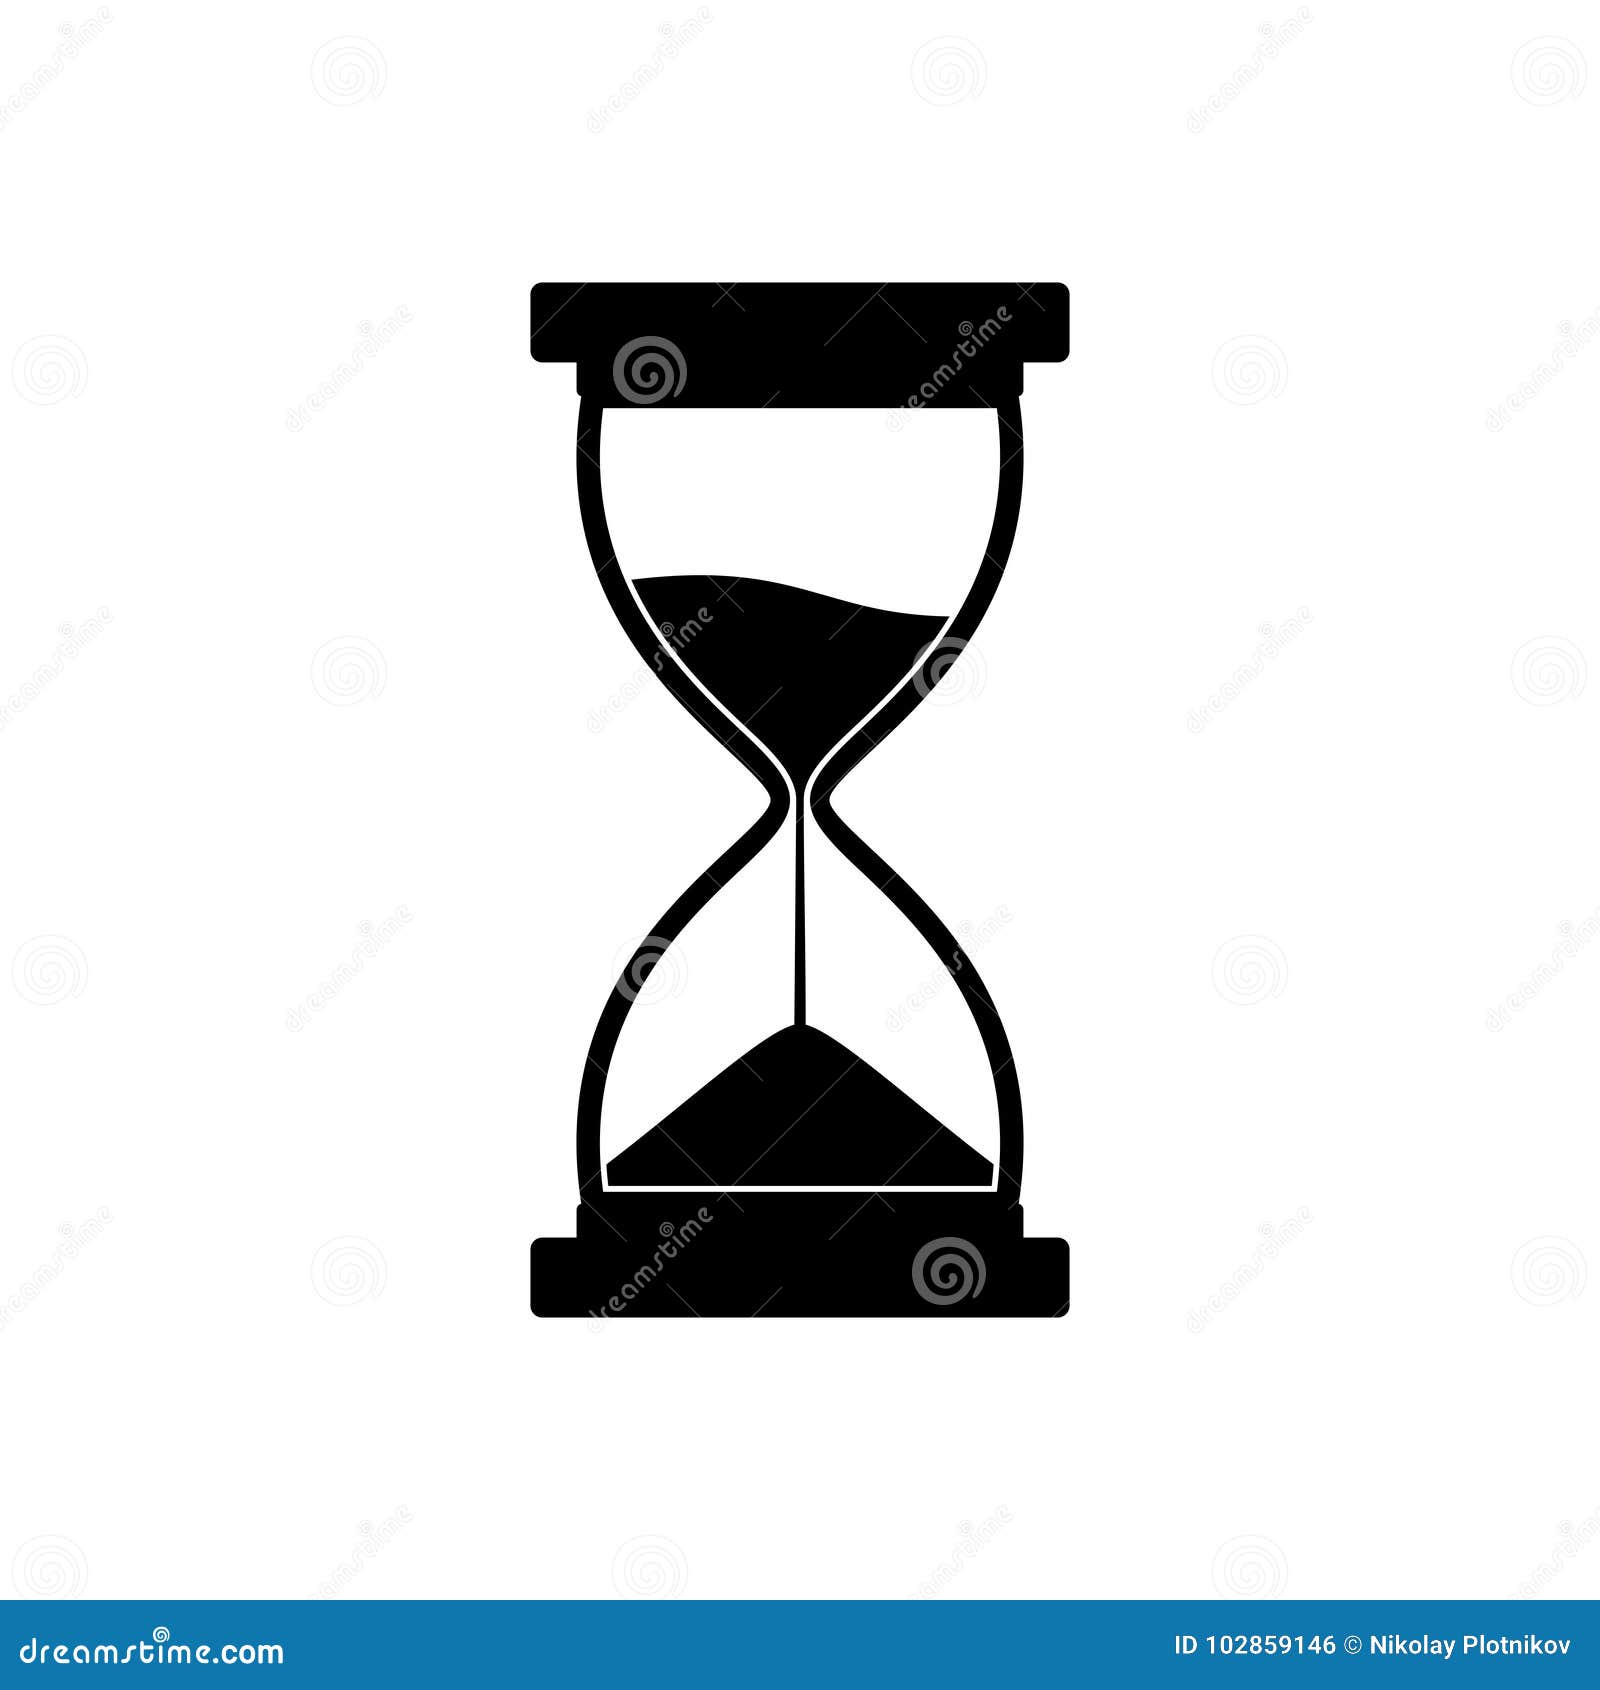 sandglass icon on white background. time hourglass. sandclock